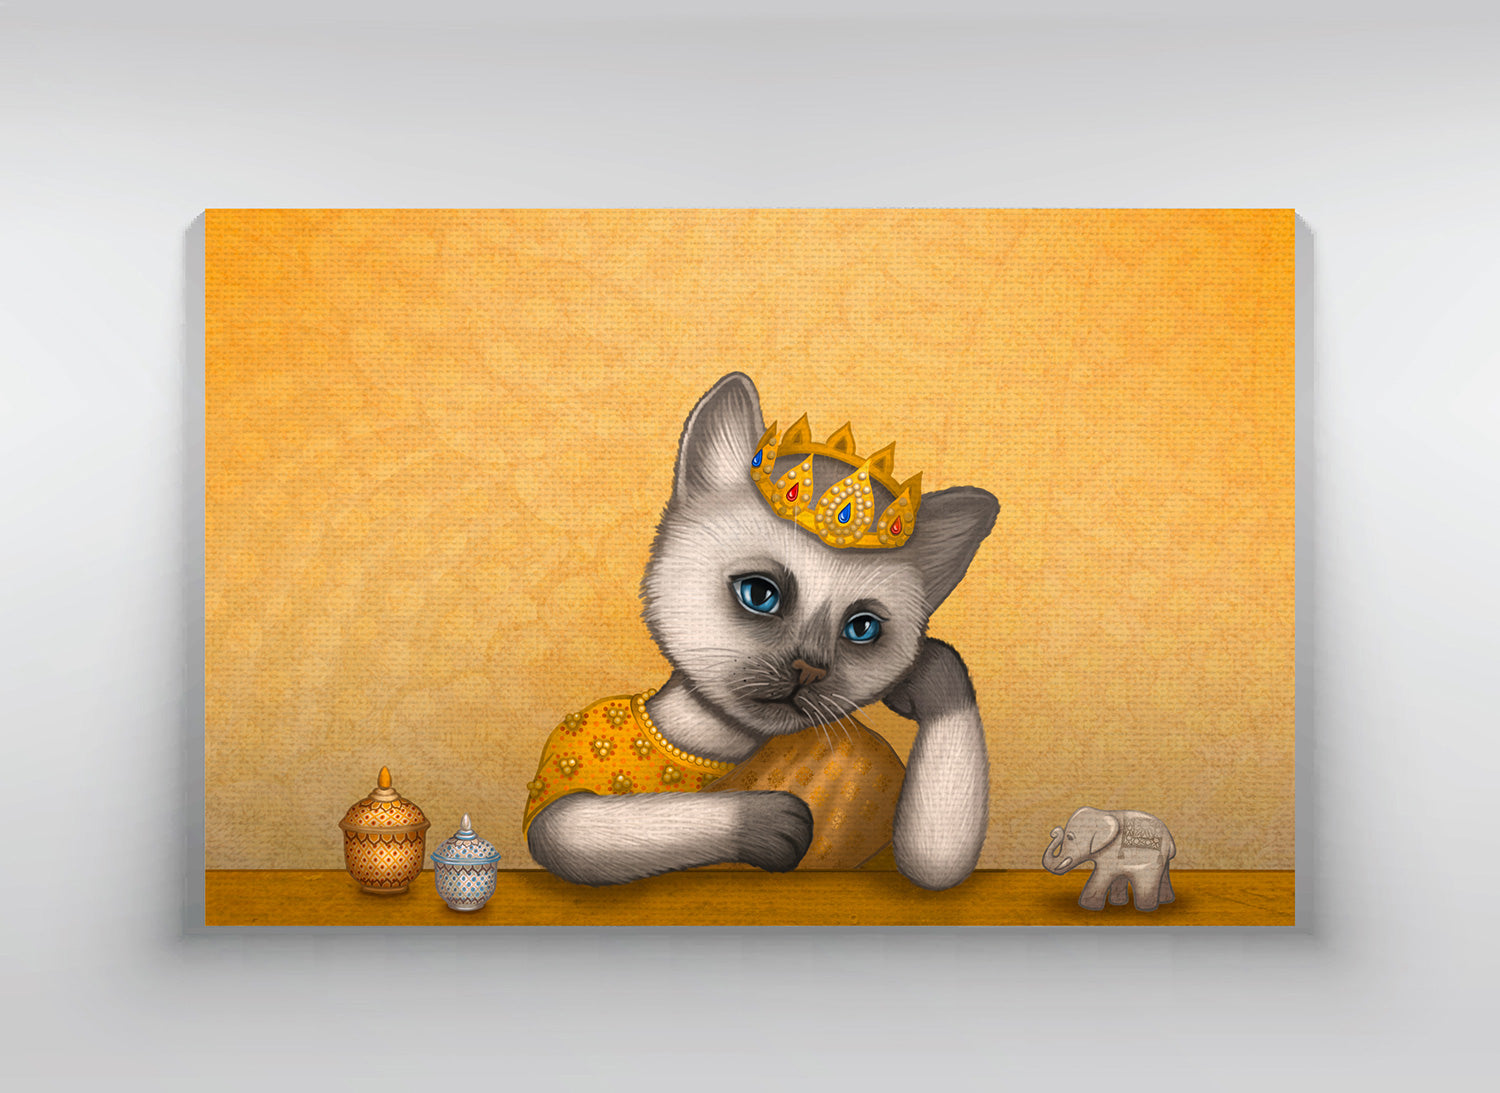 Canvas  "Lift your head, princess, if not, the crown falls" (Siamese cat)